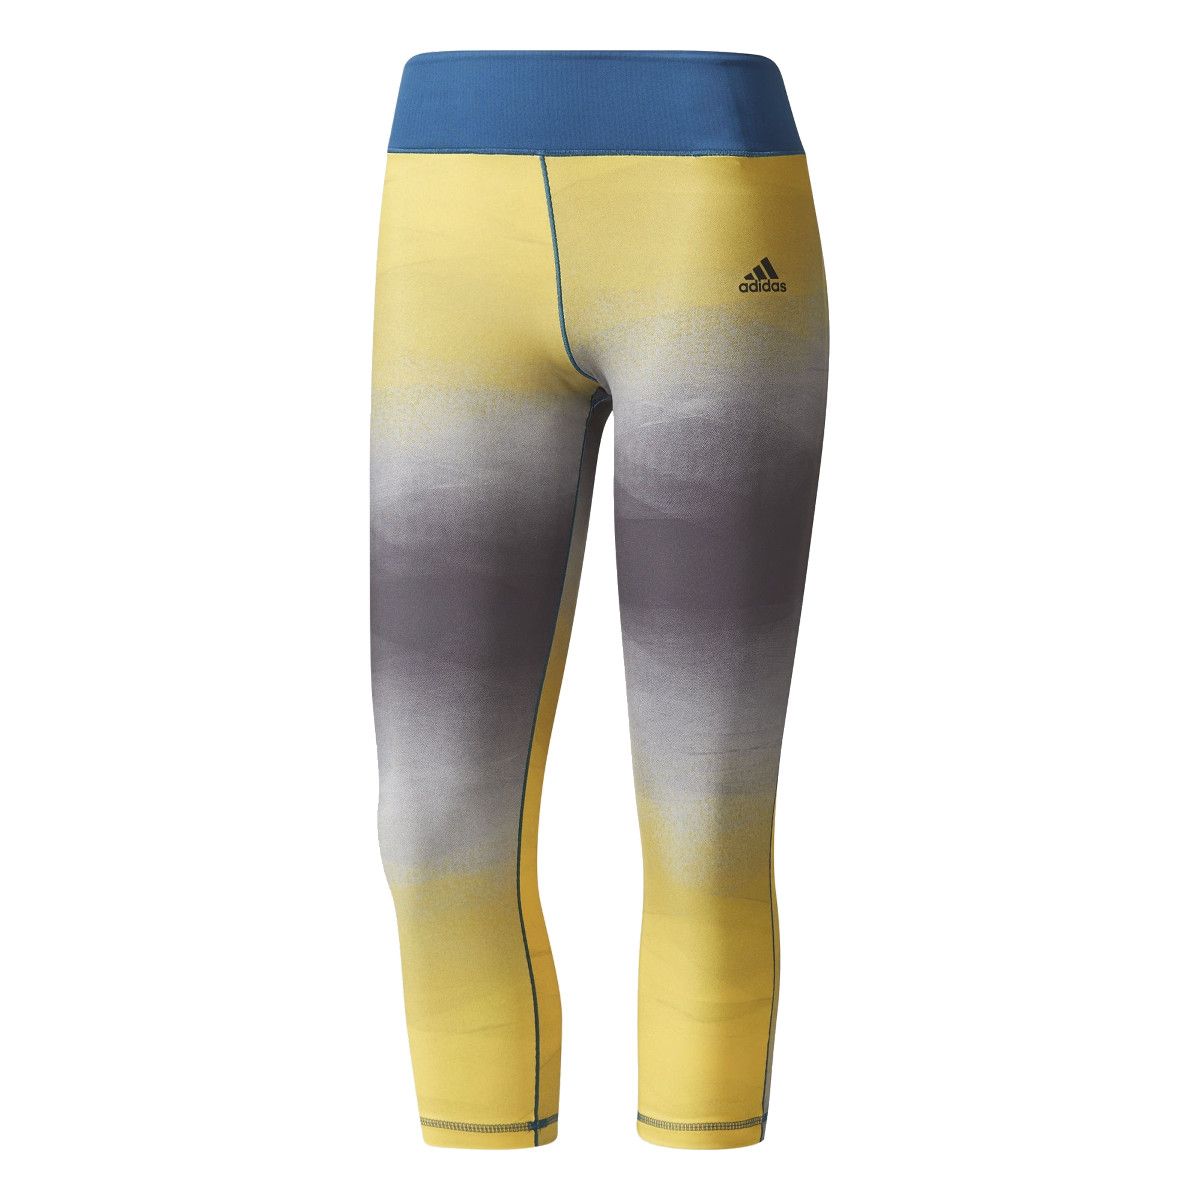 adidas Ultimate Training 3/4 Women's Tight BR6789